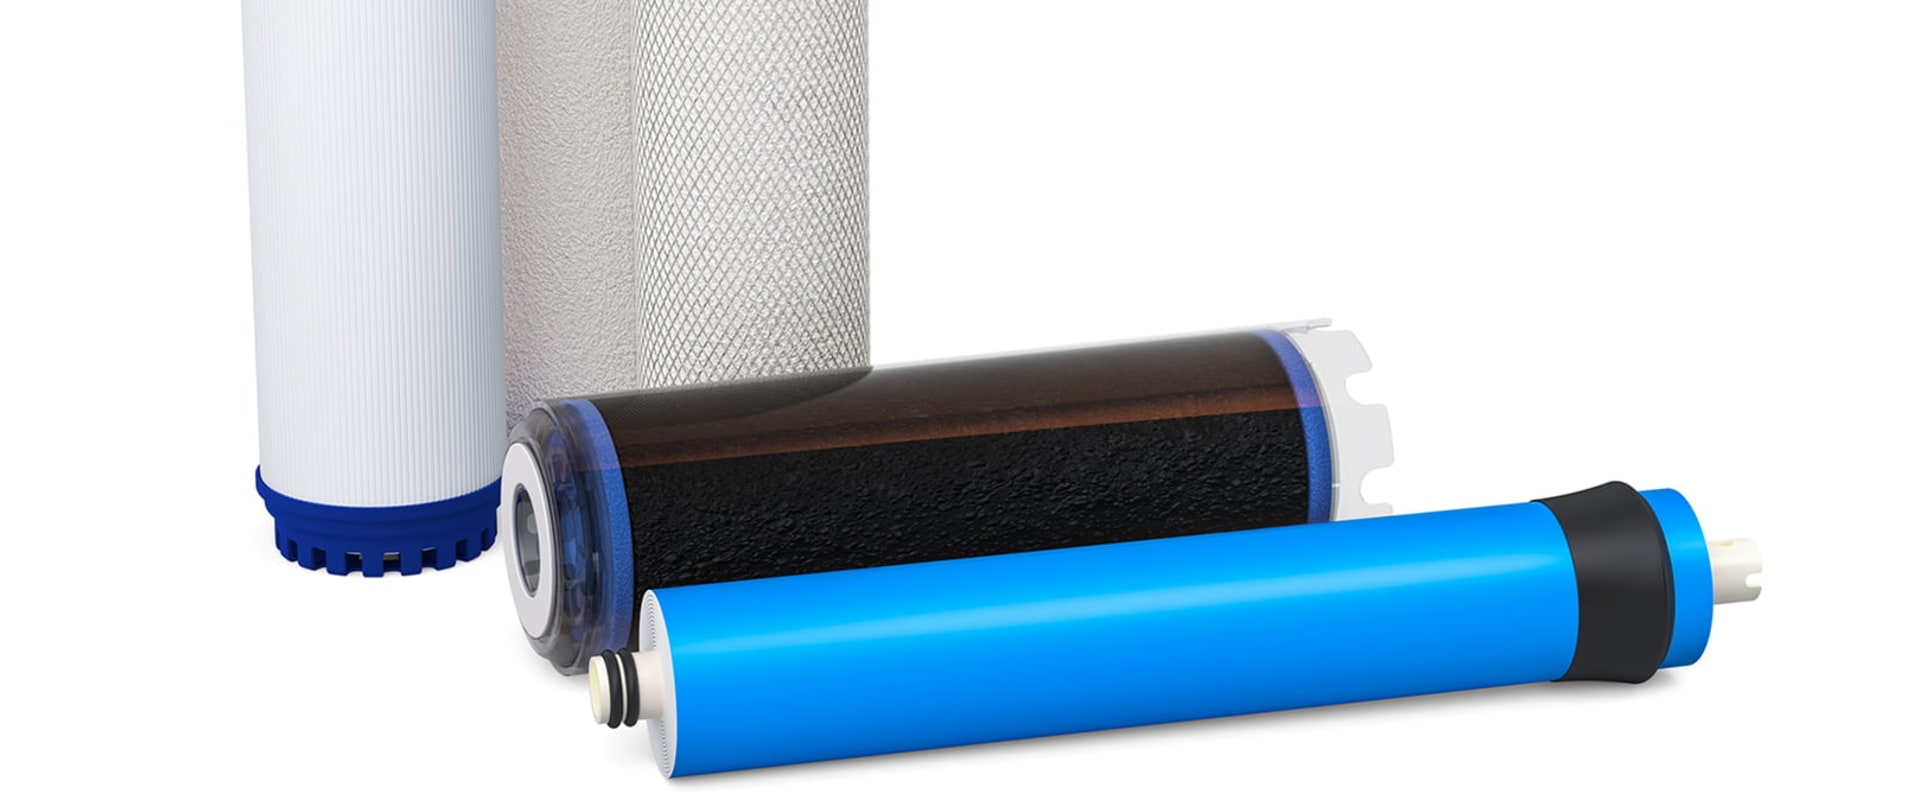 Are Water Filter Cartridges All the Same?